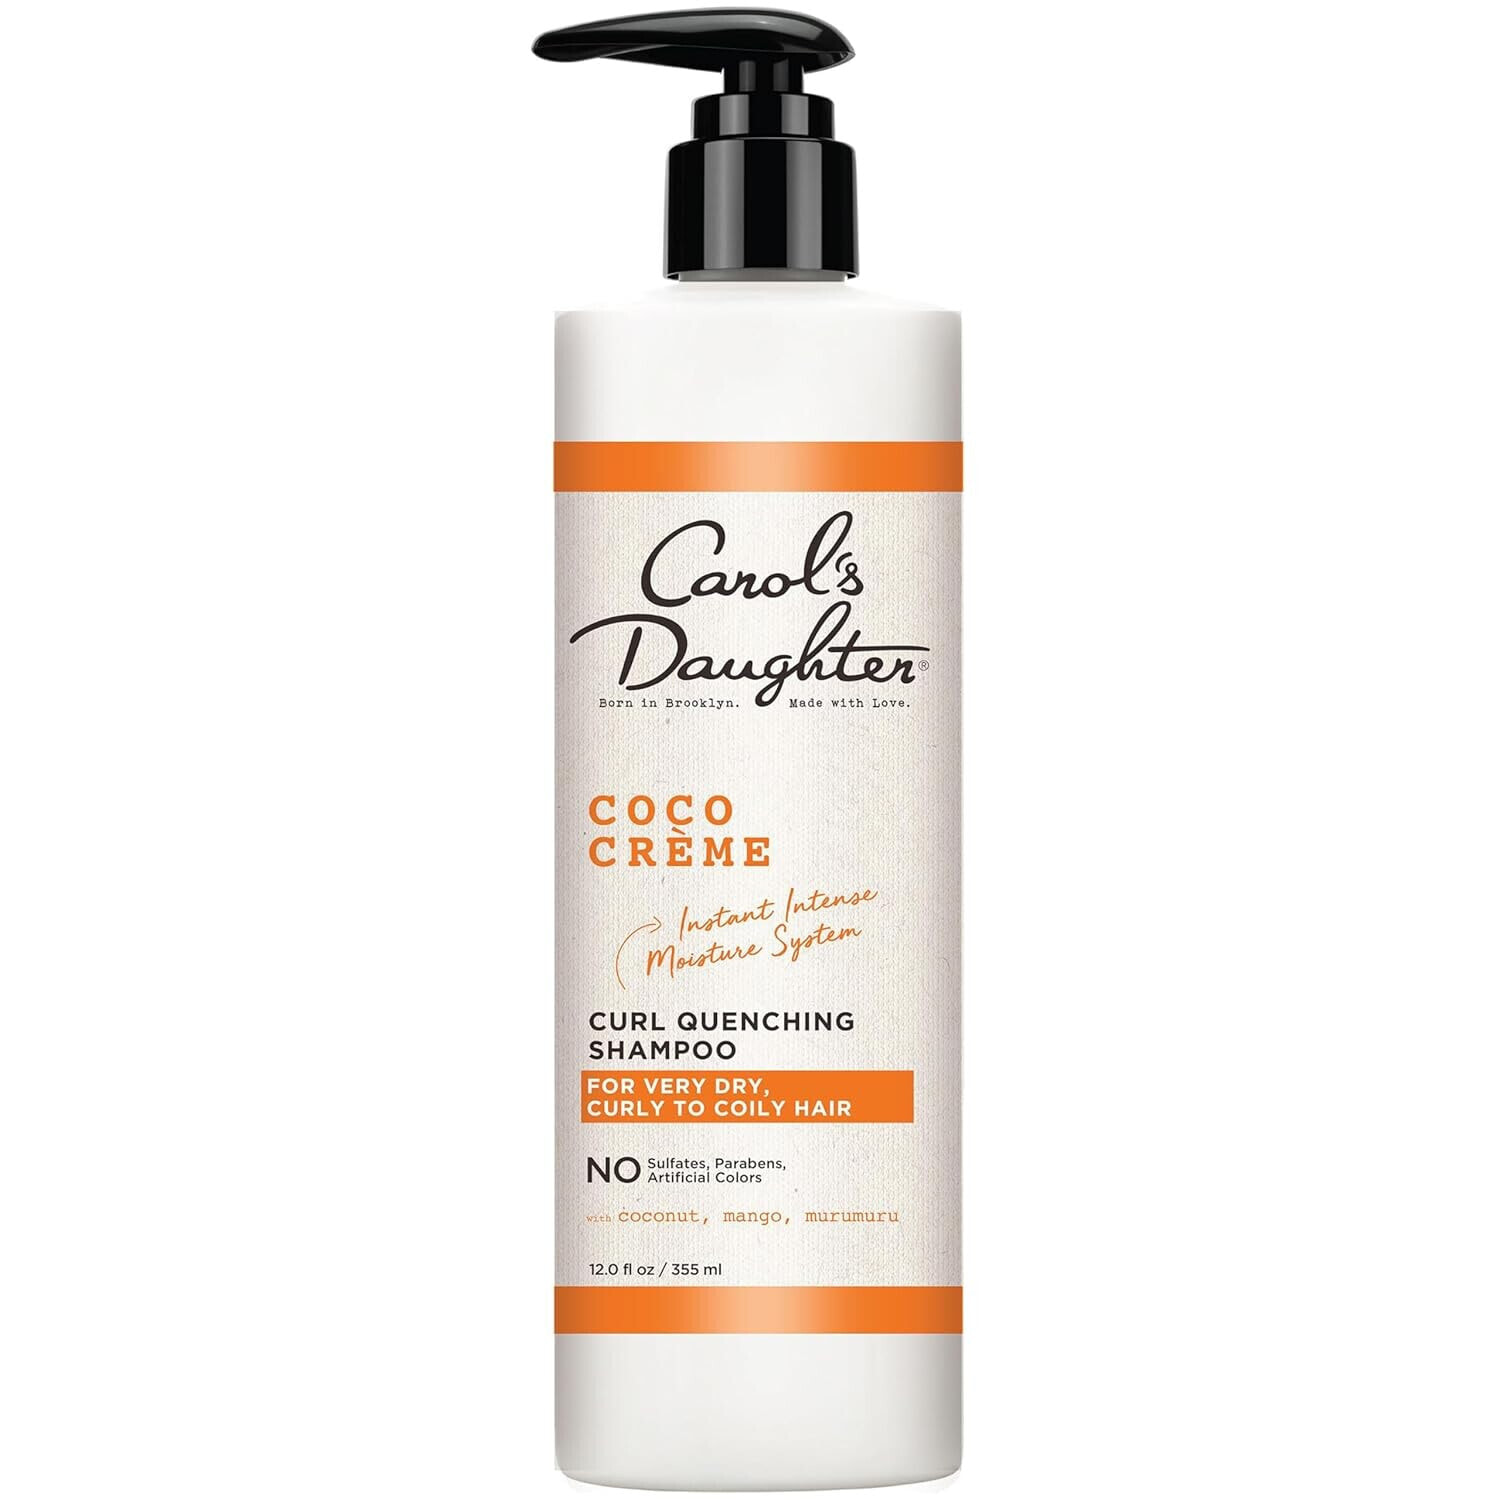 Carol's Daughter, Coco Cream, Curl Quenching Shampoo for Very Dry Curly to Frizzy Hair, 12.0 fl oz / 355 ml